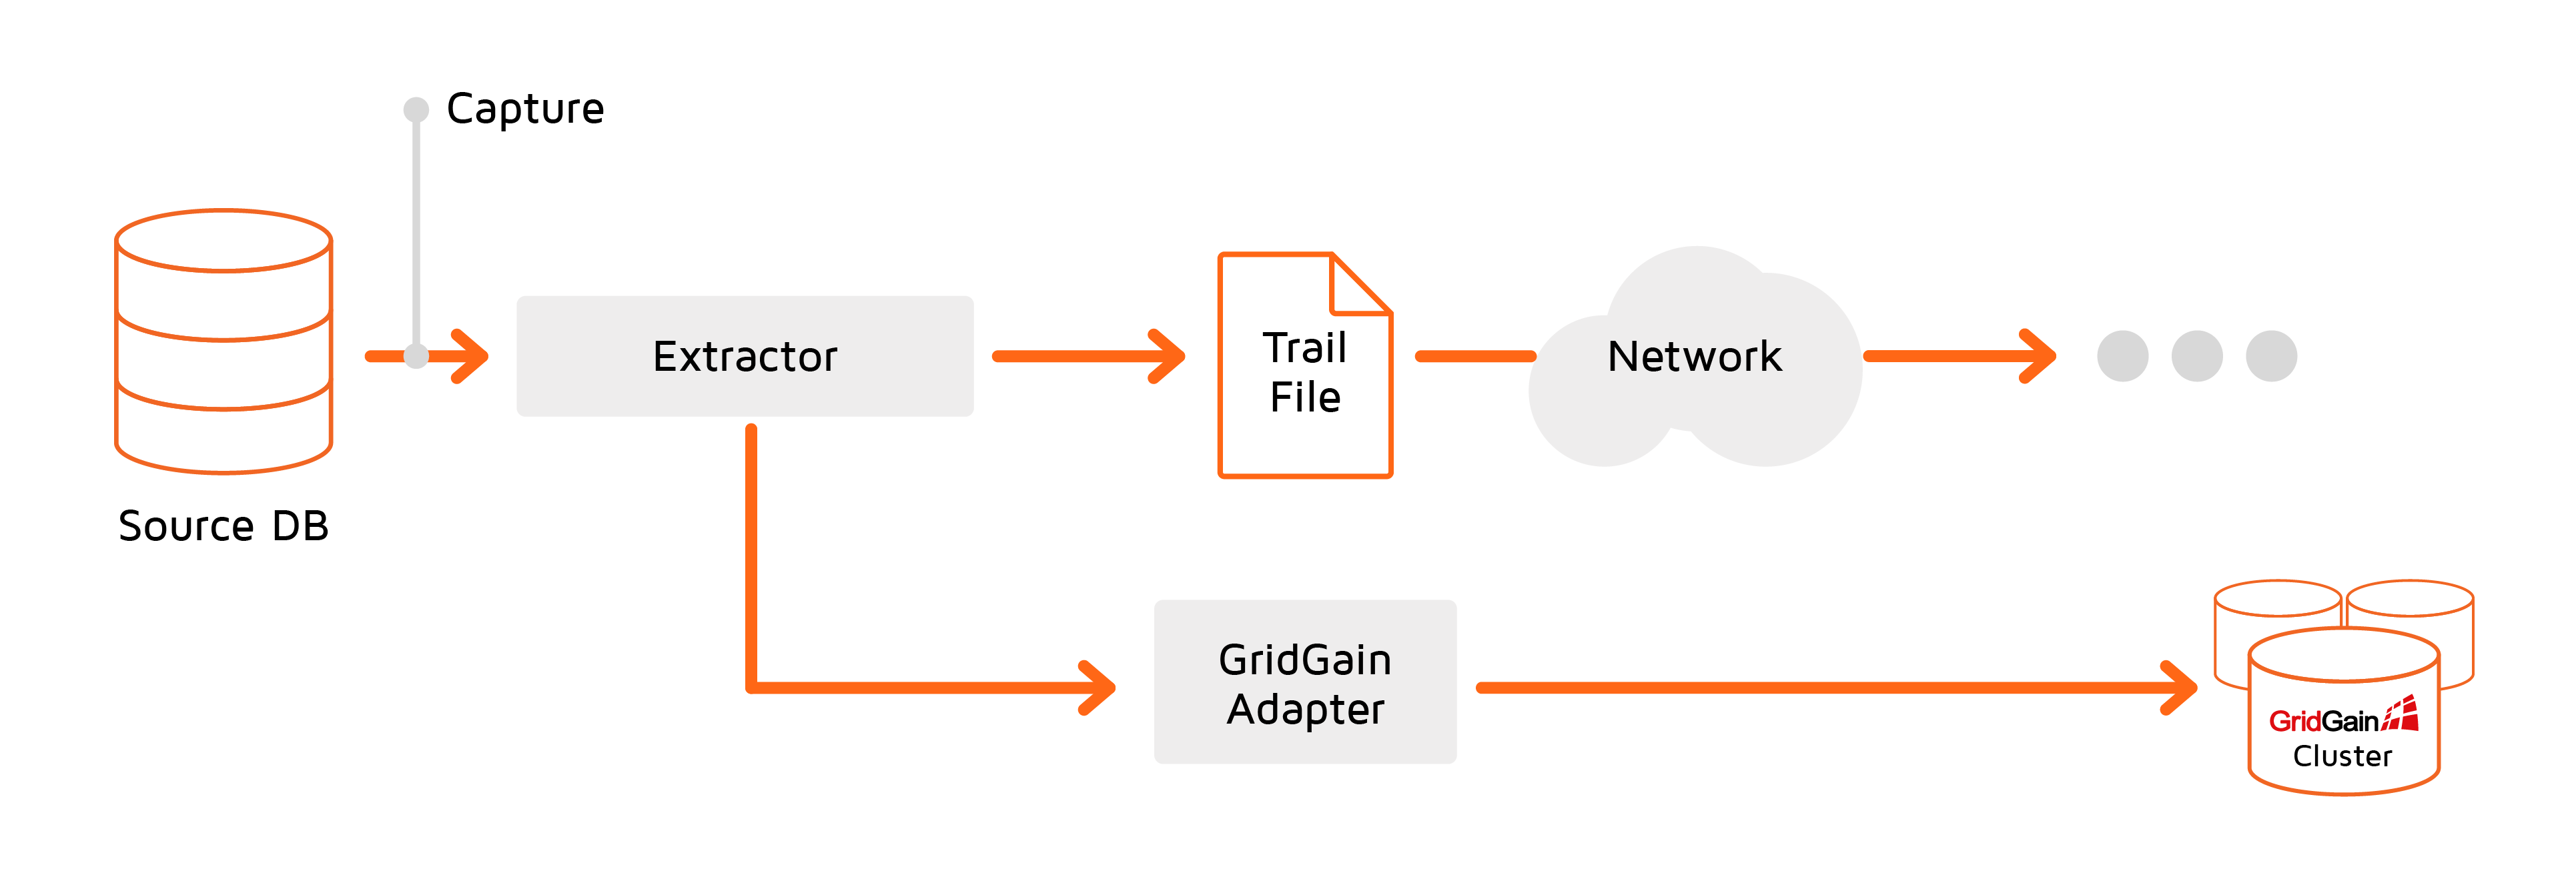 Replication to GridGain cluster on source side